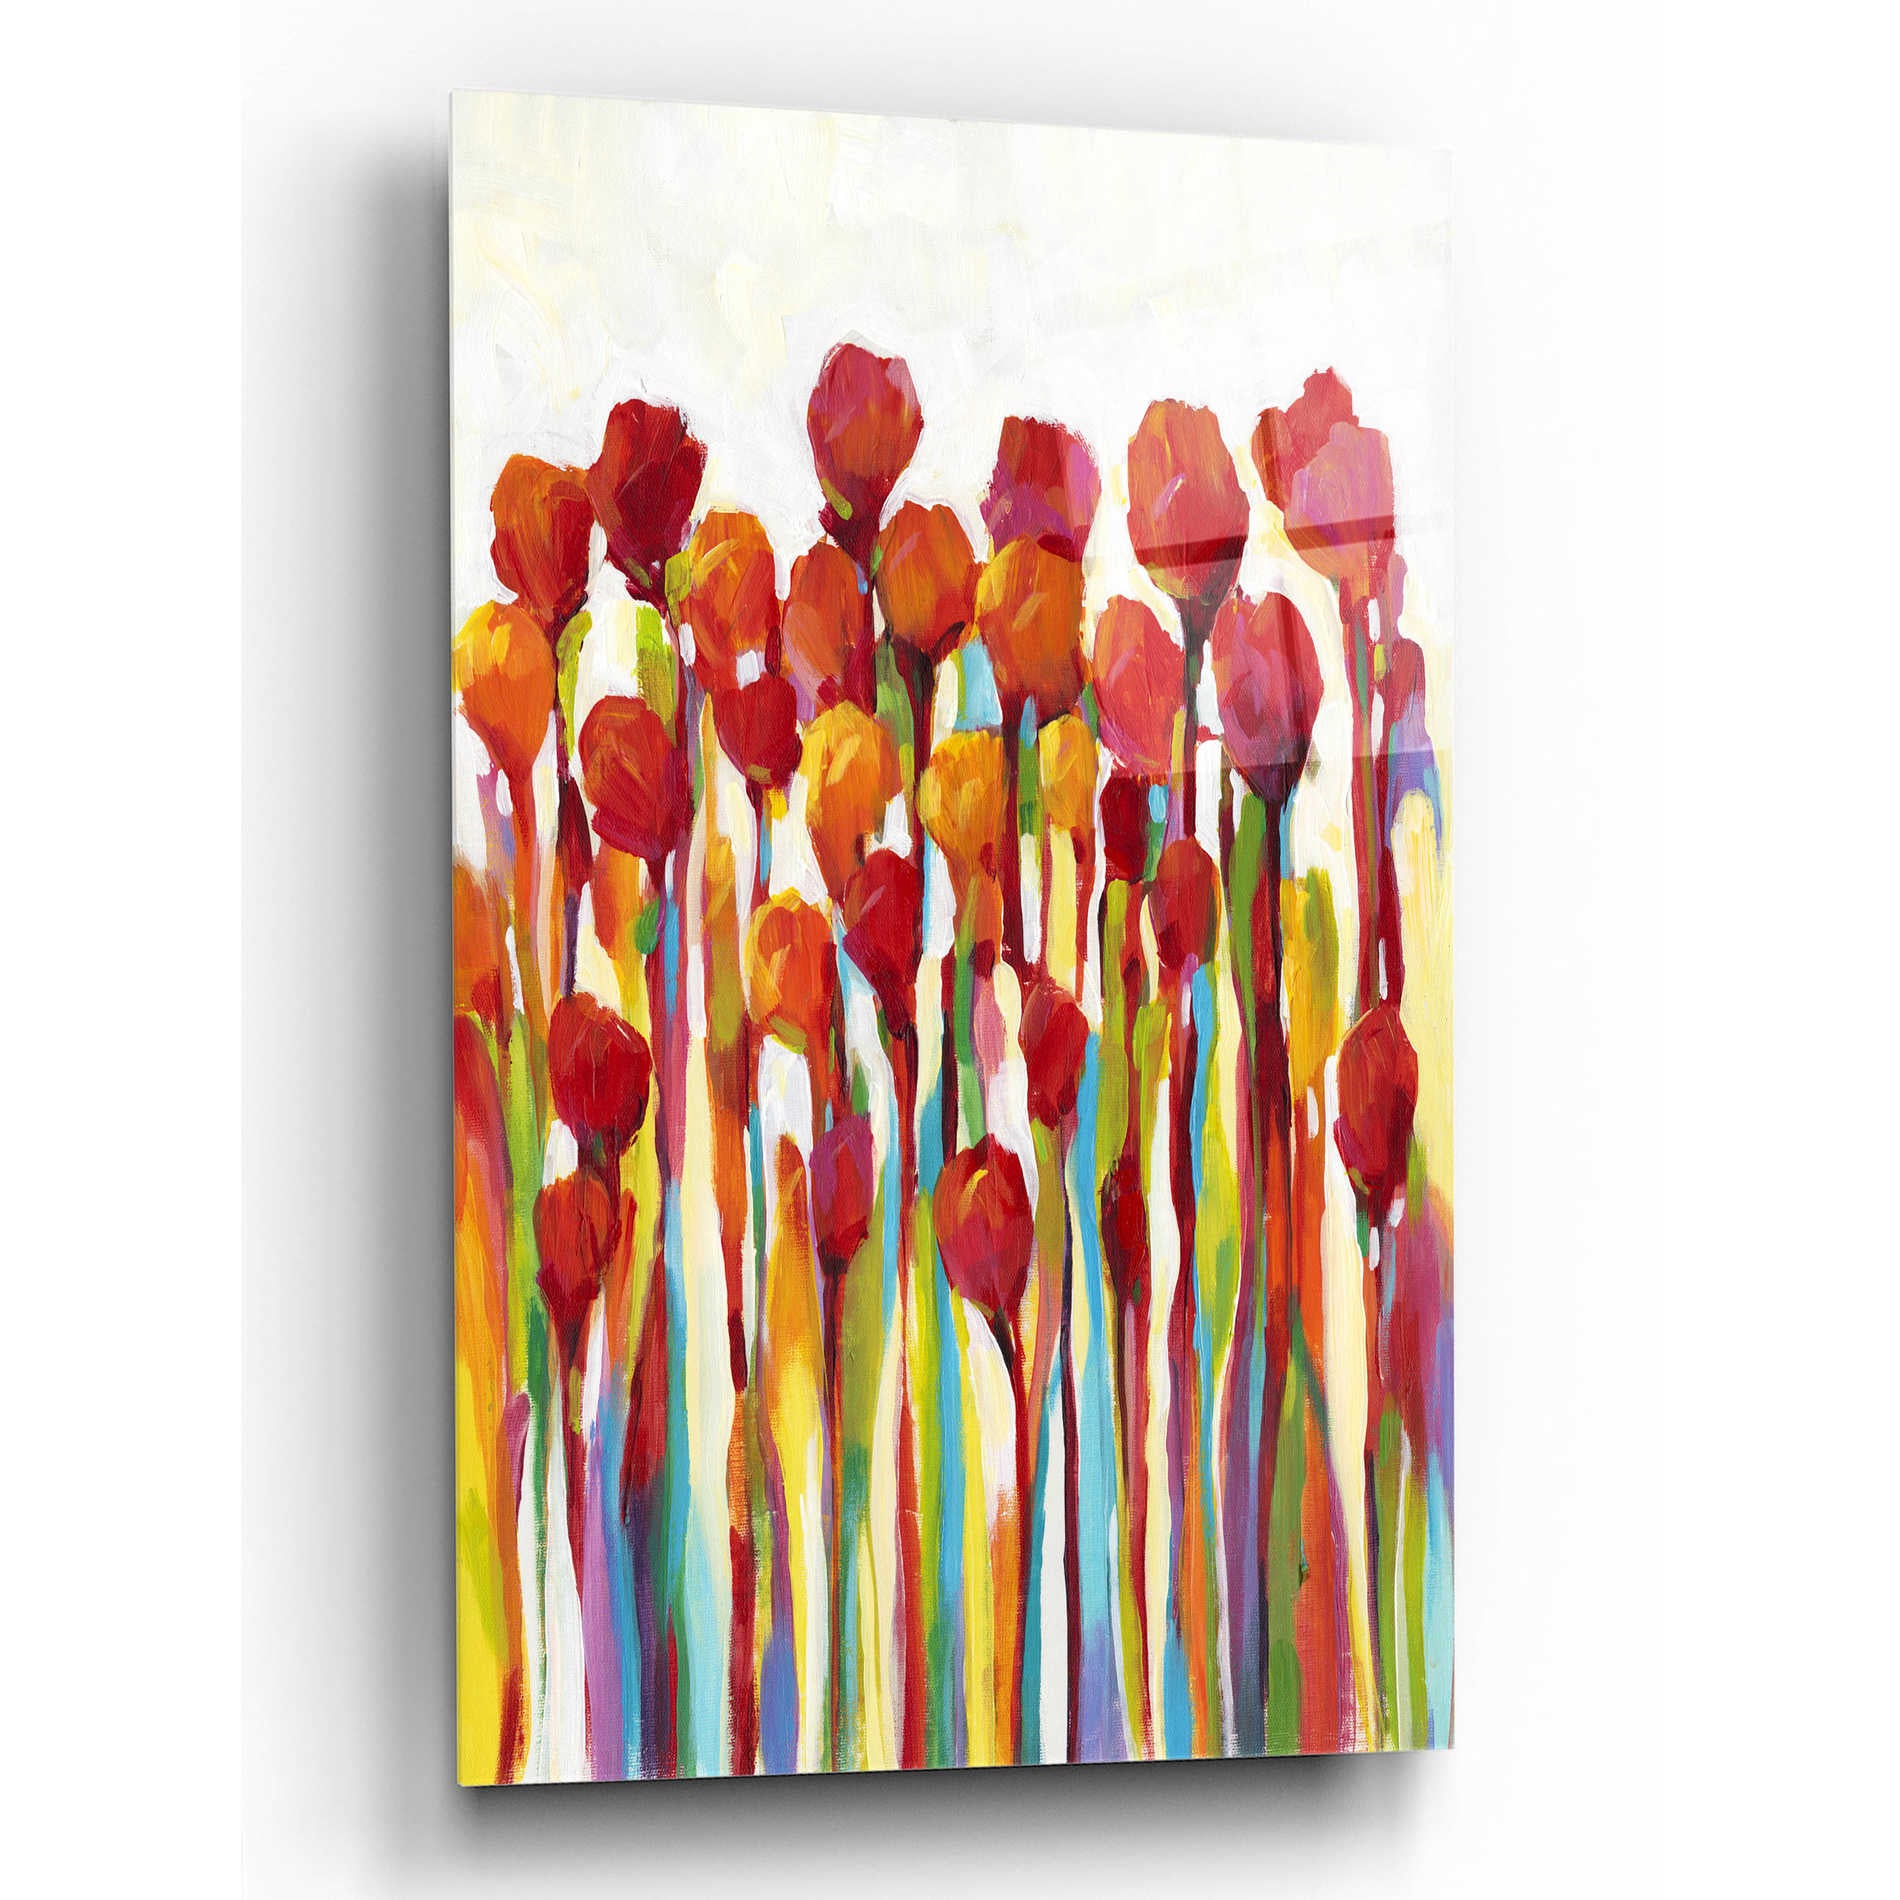 Epic Art 'Bursting with Color I' by Tim O'Toole, Acrylic Glass Wall Art,16x24